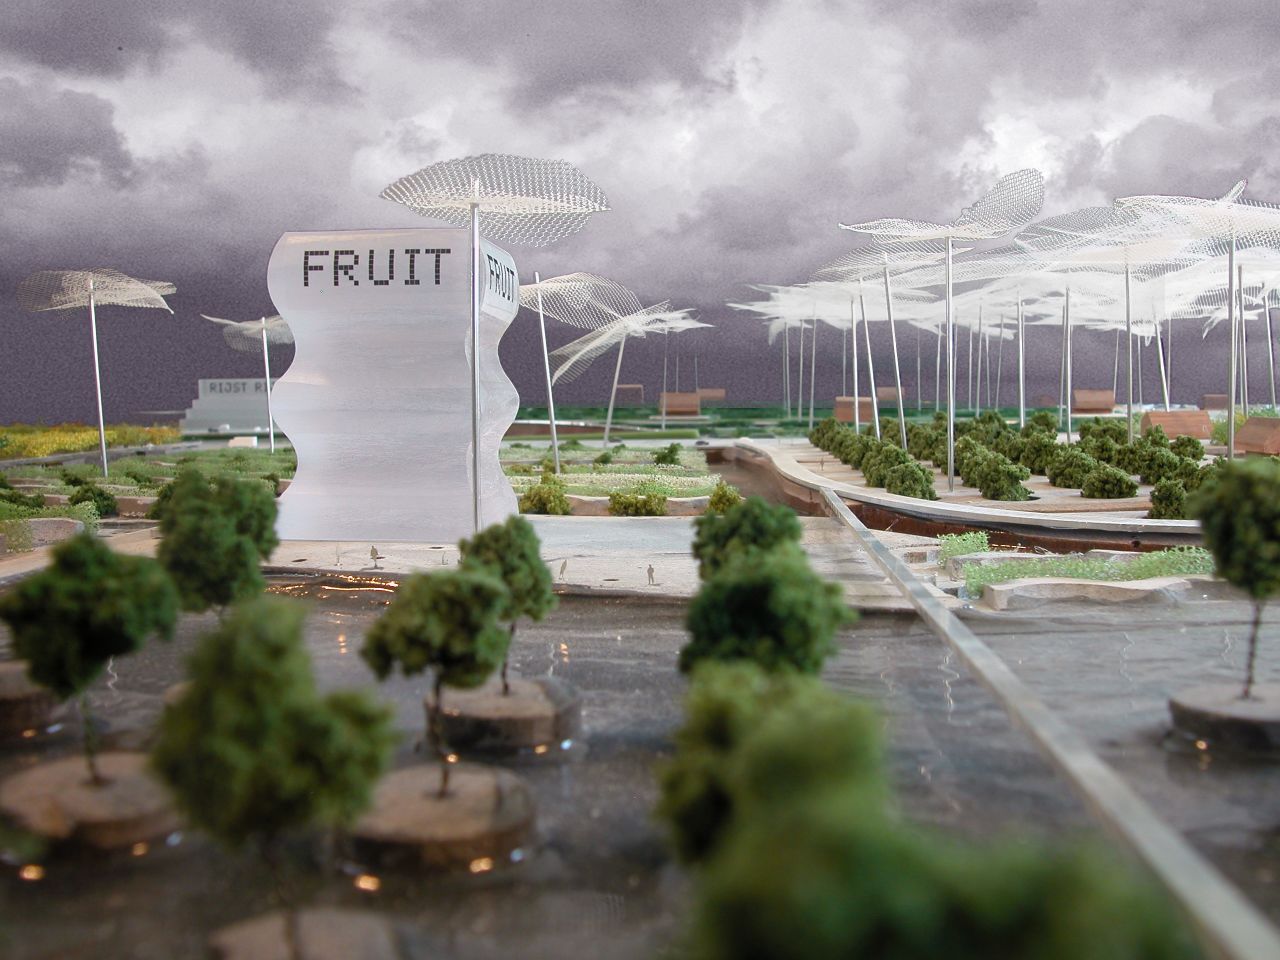 Within the next year, Dutch firm Van Bergen Kolpa Architects hope to have a working prototype of a supermarket farm that could produce most of the food items found in any grocery store.